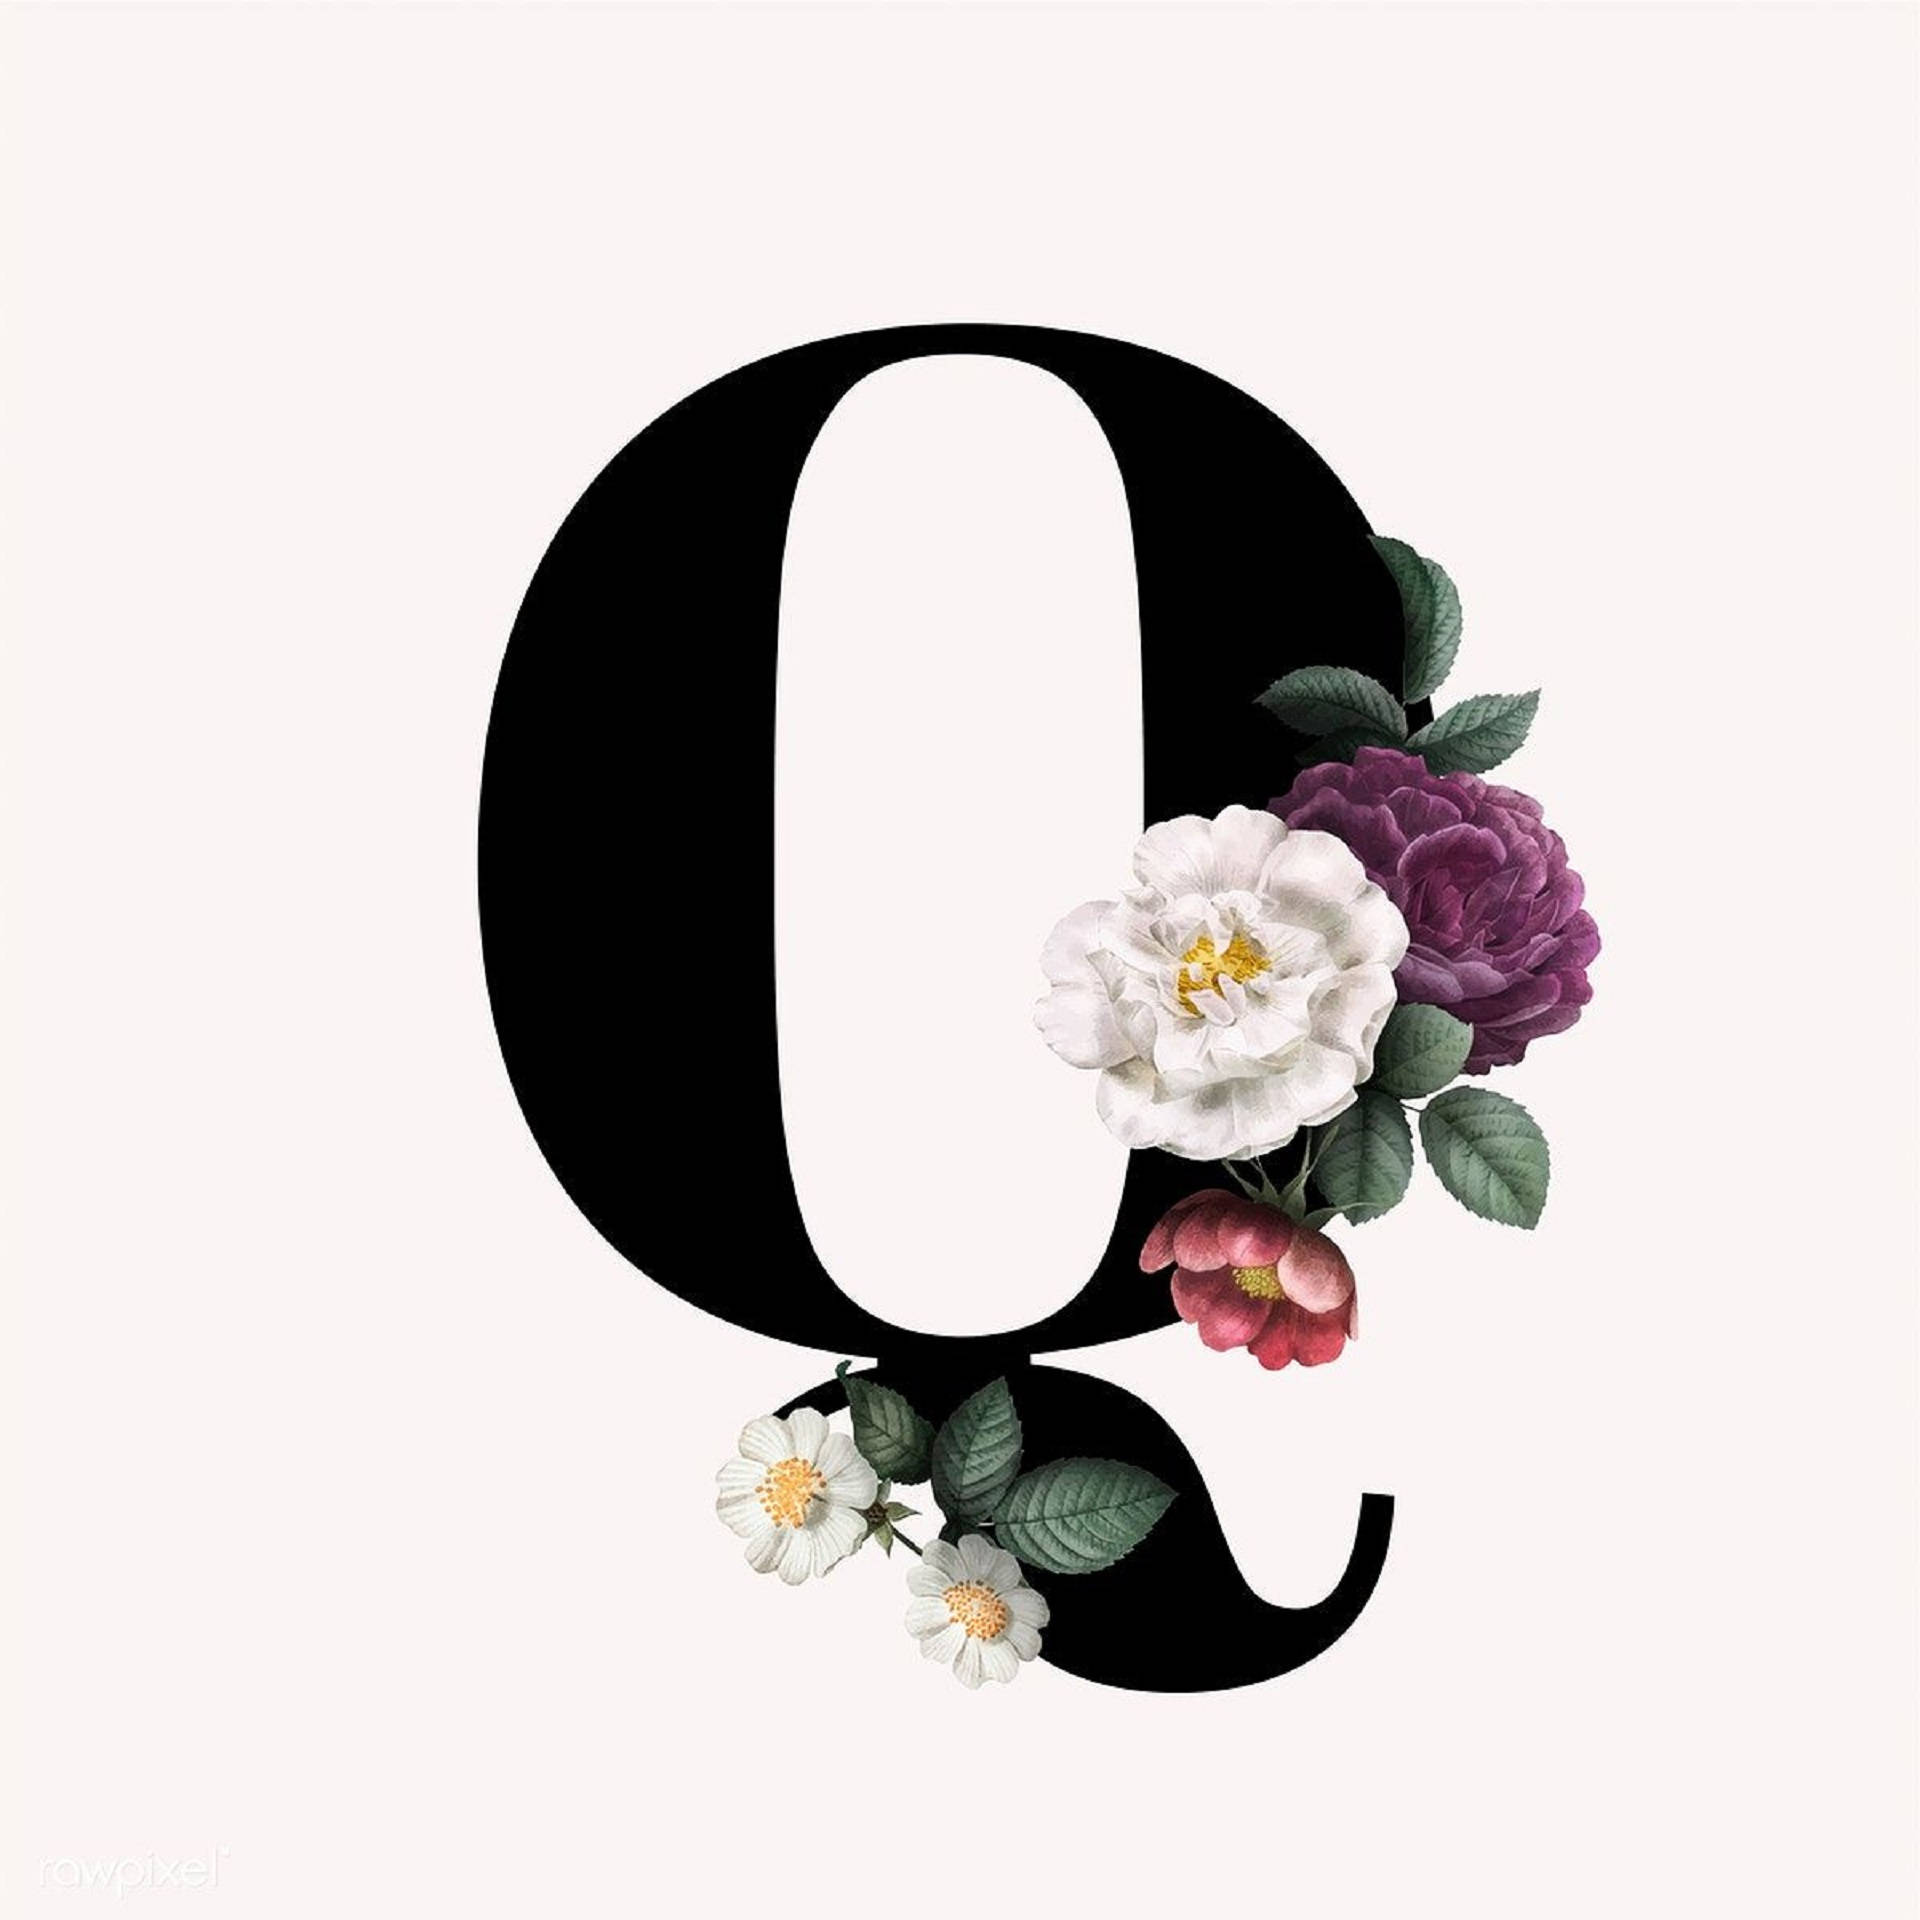 Letter Q With Flowers Background